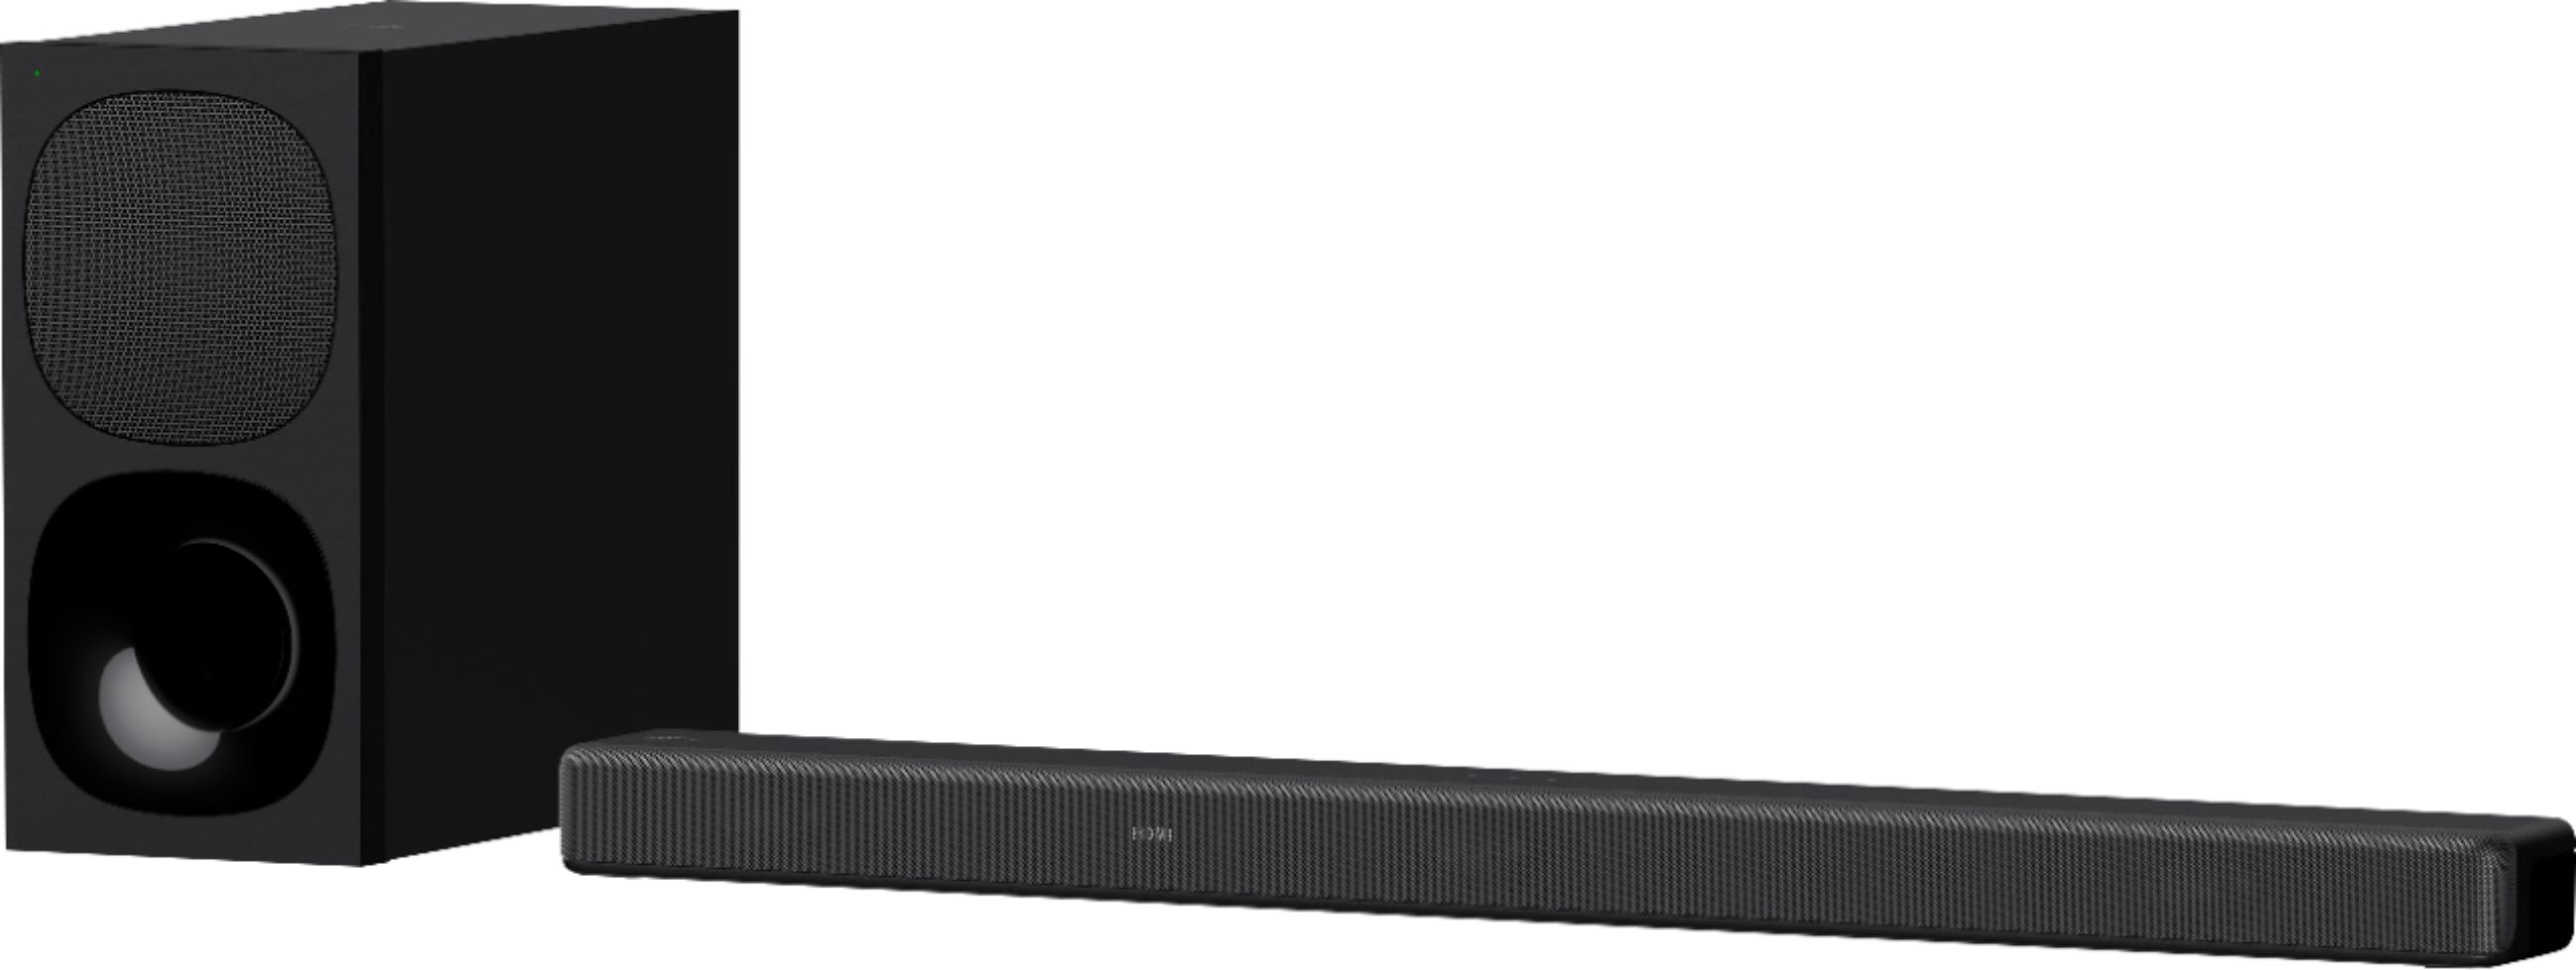 HTG700 with 3.1 Channel Soundbar Best HT-G700 Dolby Subwoofer Sony Buy: Wireless Black and Atmos/DTS:X